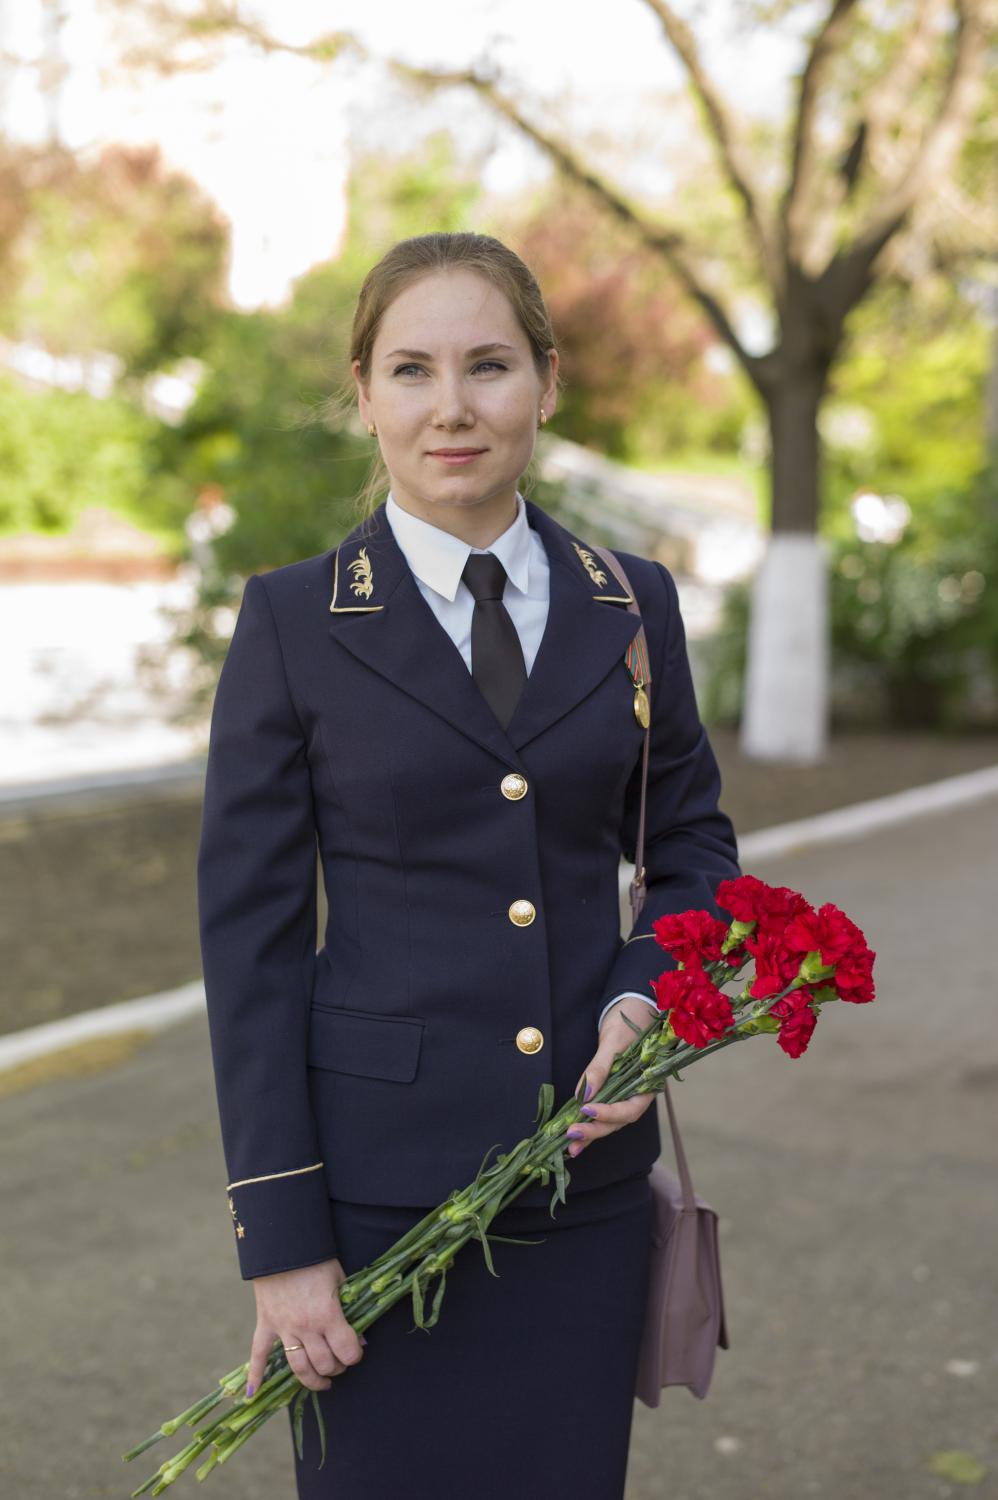  Anastasia poses for a portrait before the parade, wearing her uniform of the Transnistrian...